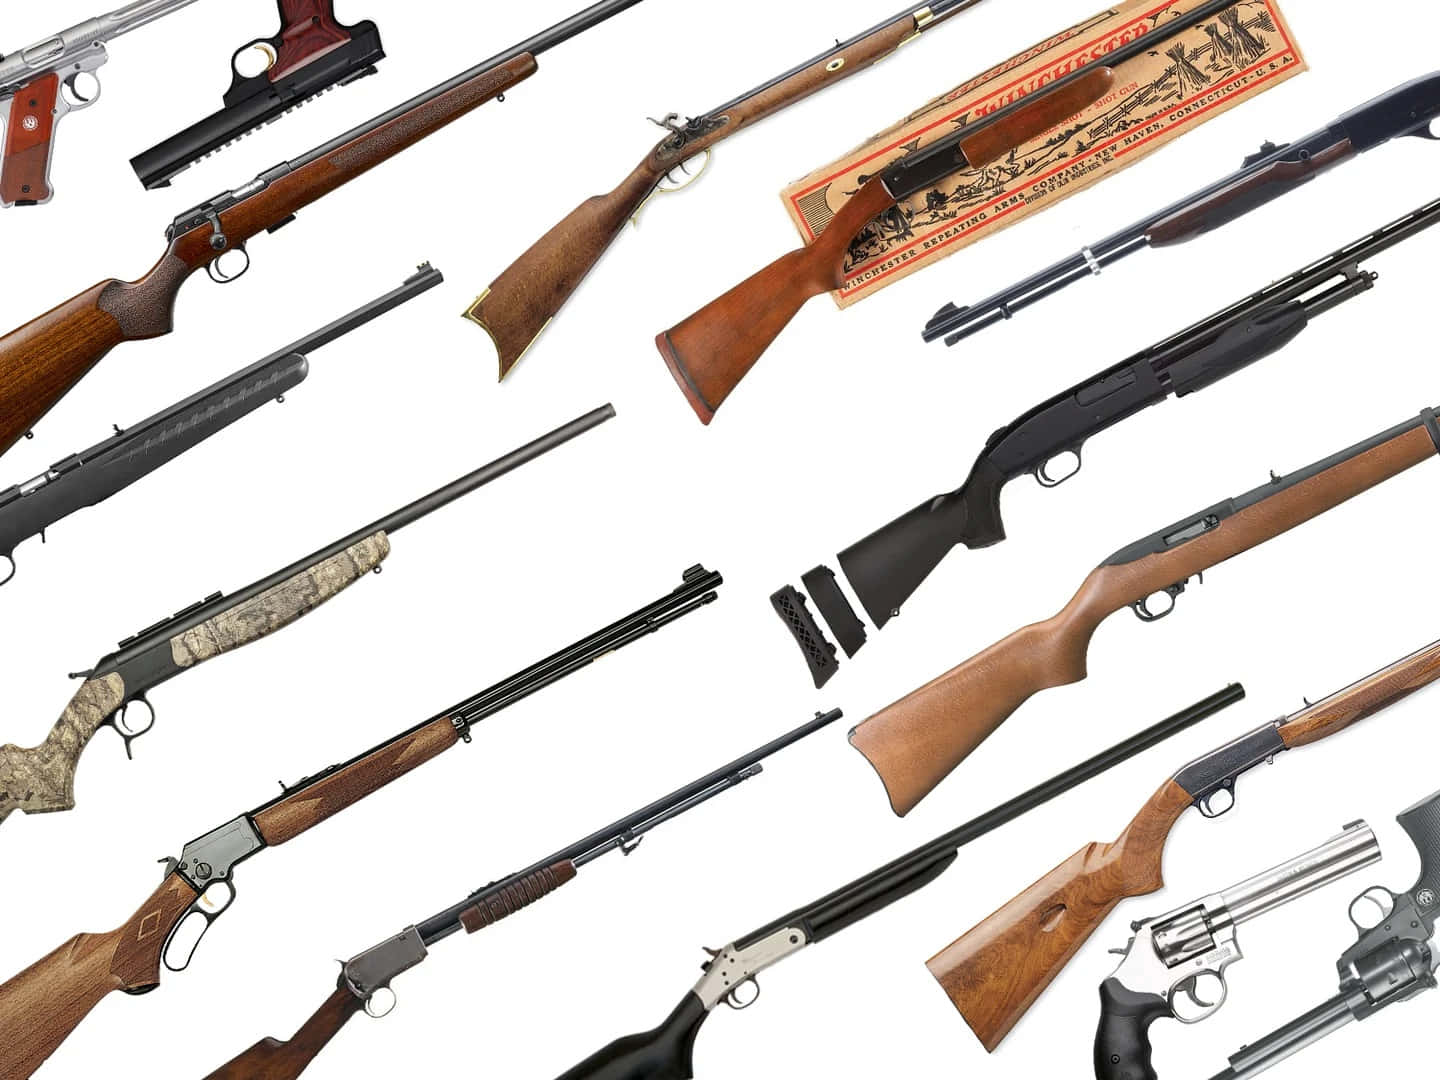 A Group Of Different Types Of Rifles